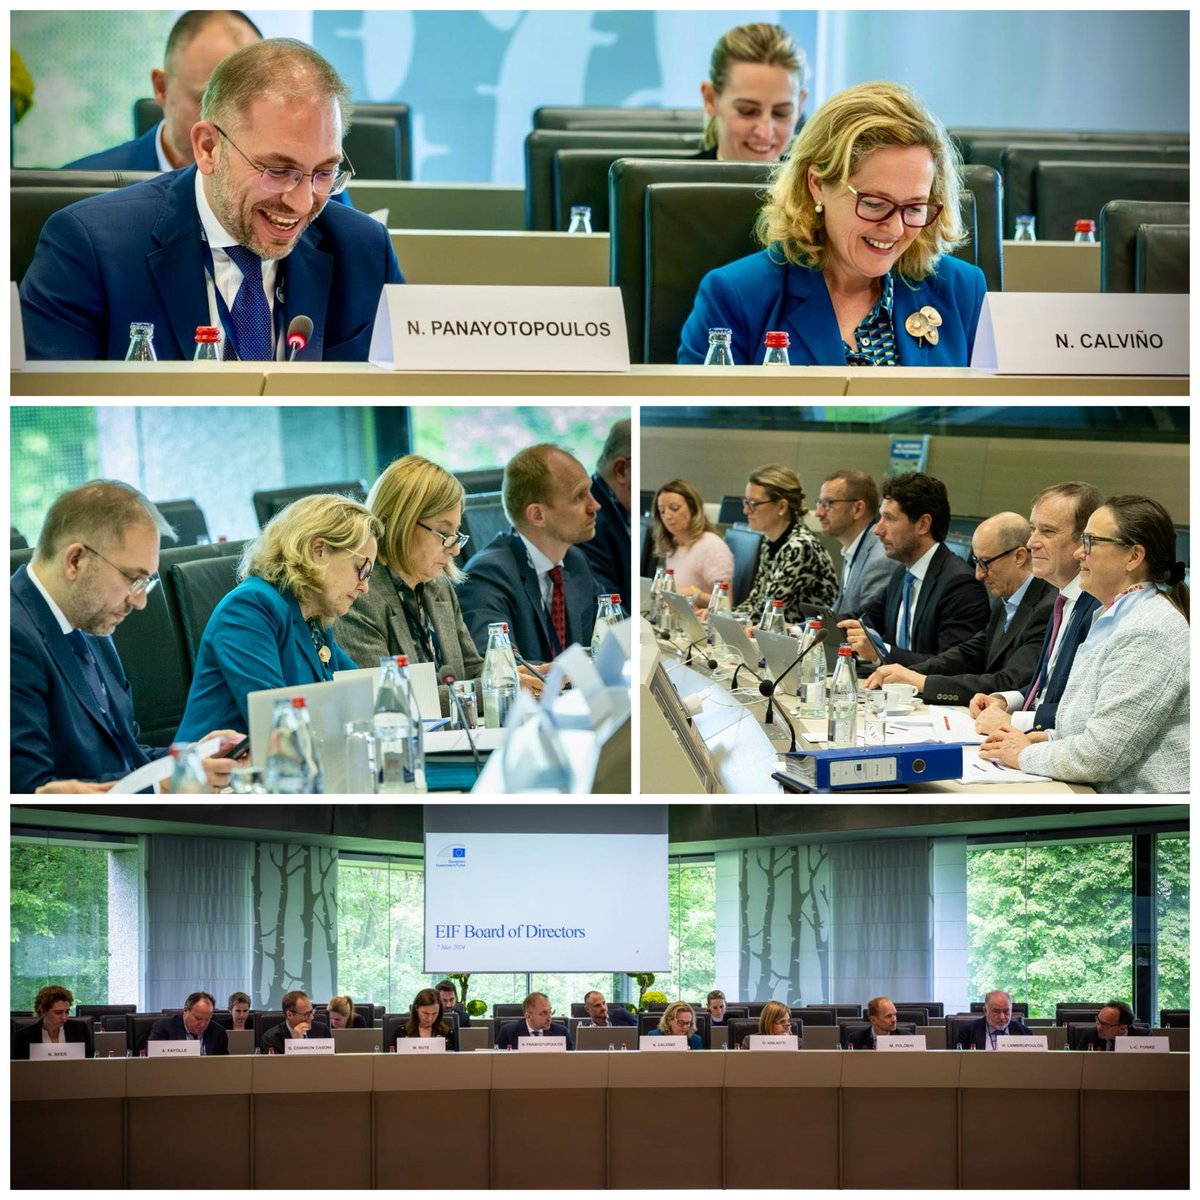 Very fruitful exchanges today at the @EIF_EU Board of Directors. We discussed close to 40 transactions to improve access to finance for small businesses. We are putting Europe’s #capital to work, fostering innovation, productivity, strategic autonomy & our shared values.